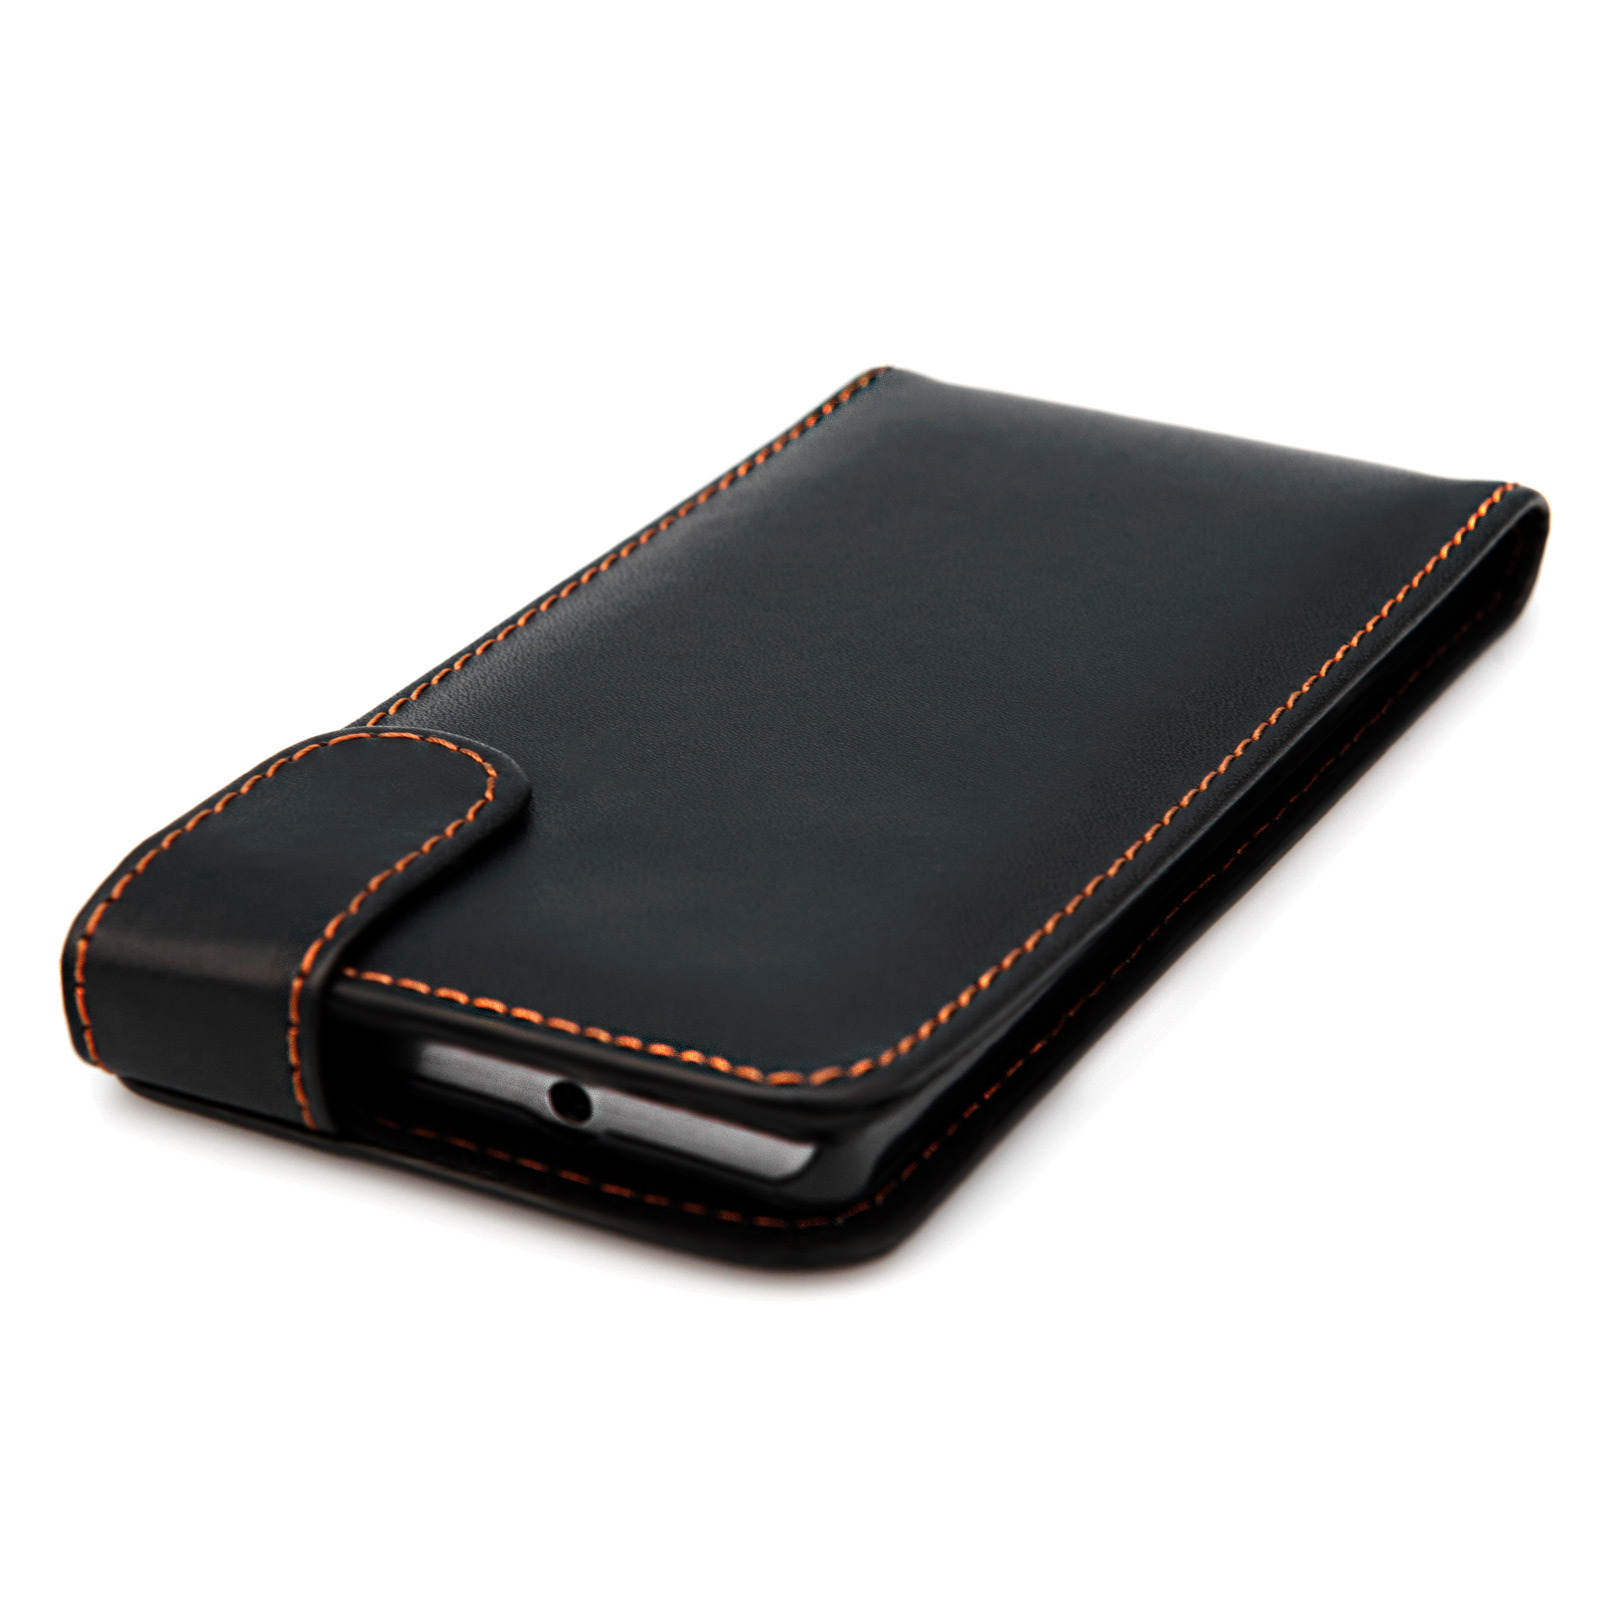 YouSave Accessories Huawei Ascend P7 Leather-Effect Flip Case - Black